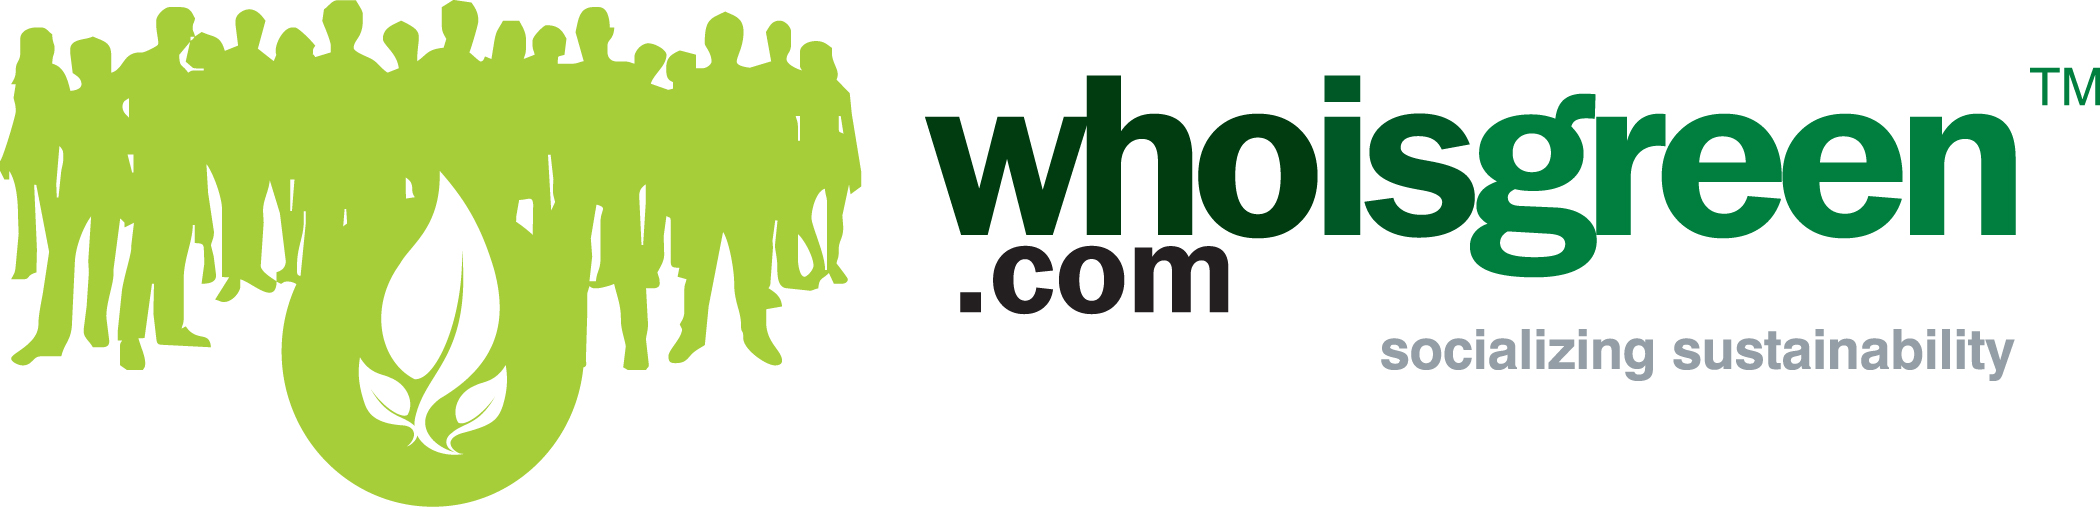 Whoisgreen.com Launches in NYC